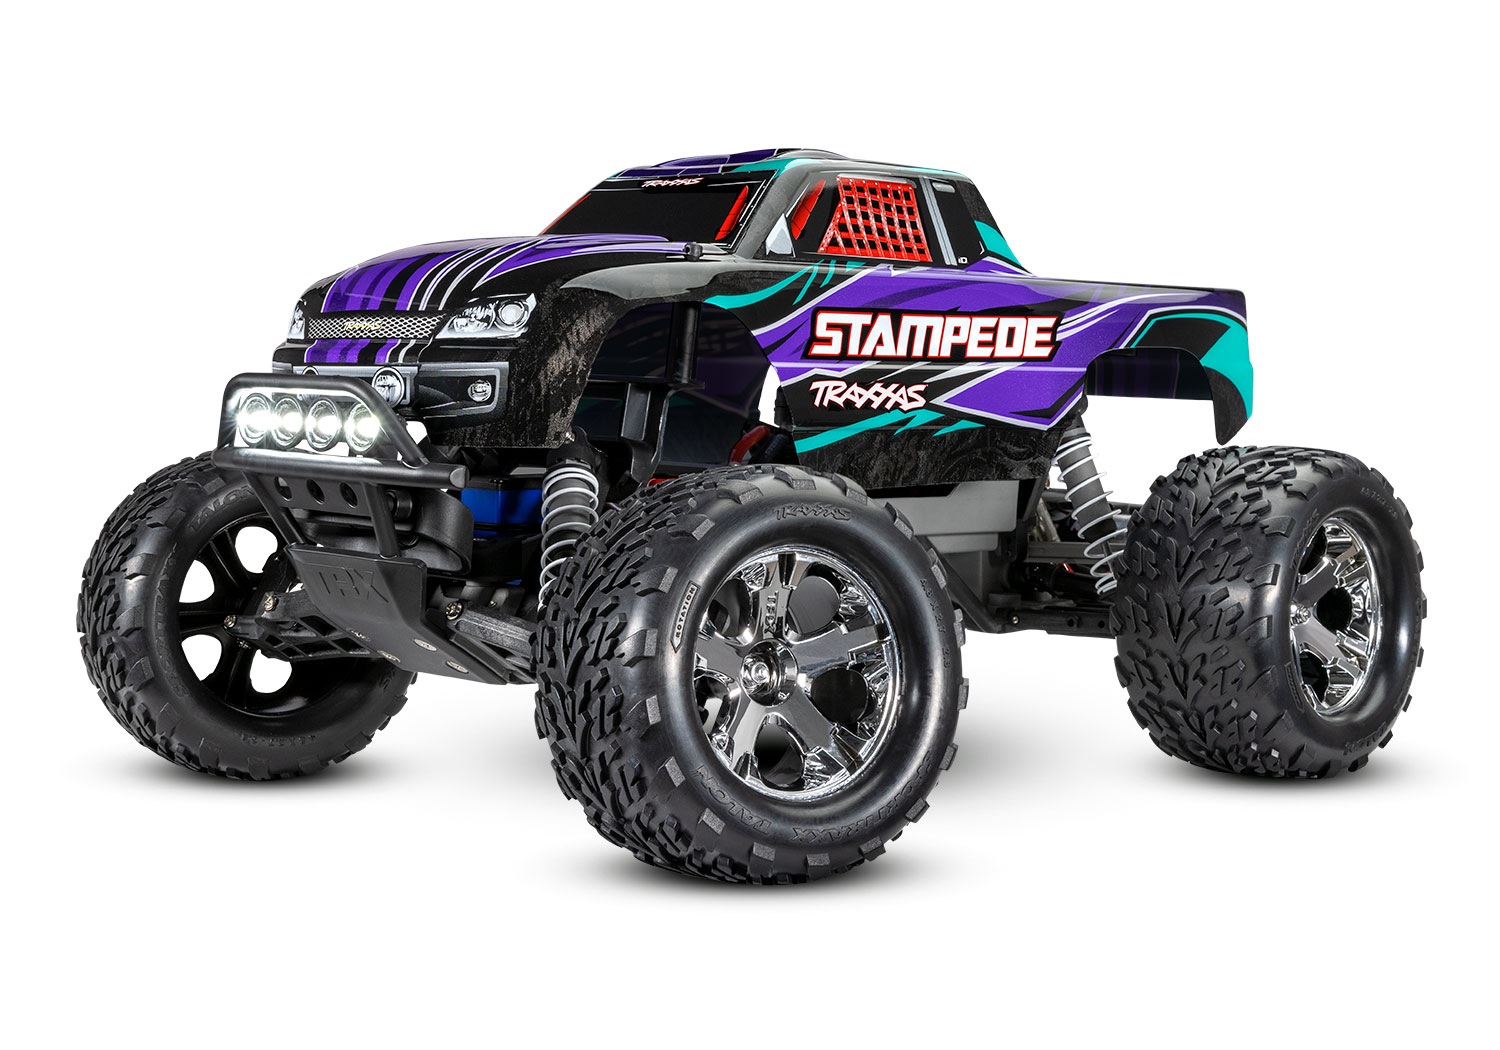 Traxxas Stampede XL5 2WD monster truck RTR 2.4Ghz met LED verlichting inclusief Power Pack - Paars